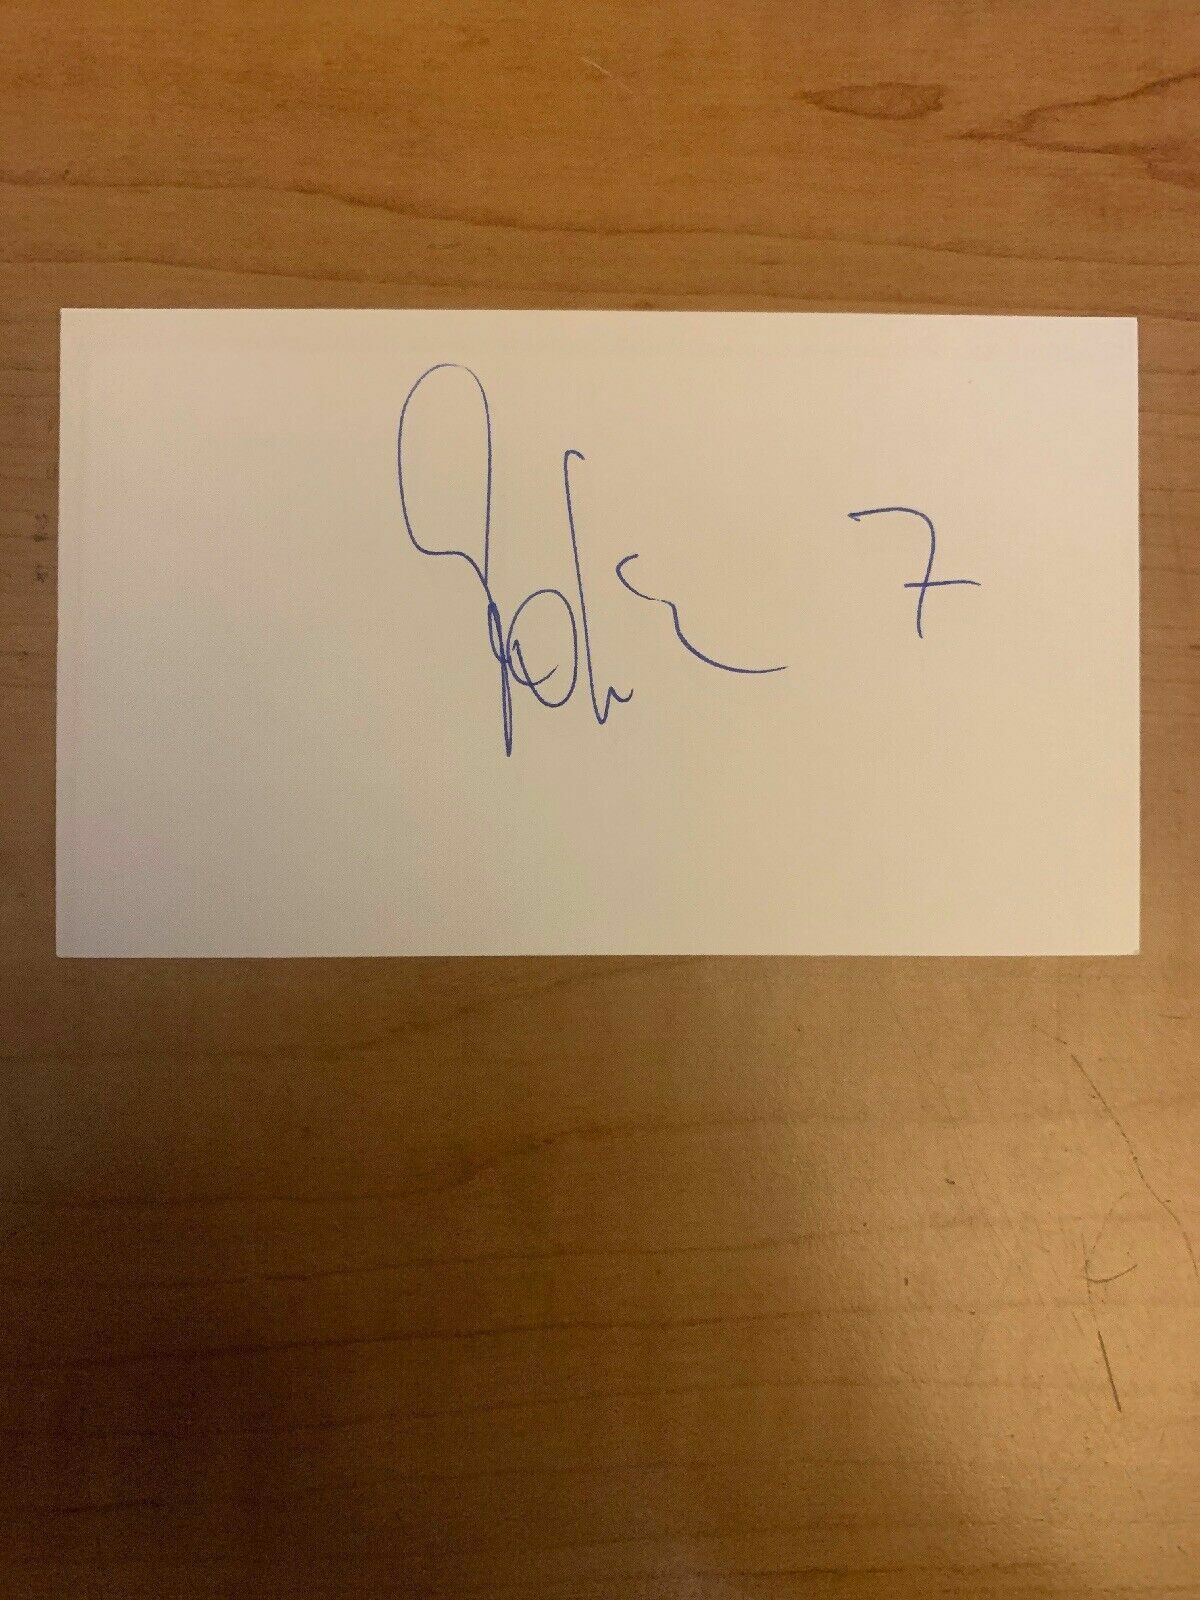 MARTIN GROTH - SOCCER - AUTOGRAPH SIGNED - INDEX CARD - AUTHENTIC- B6736